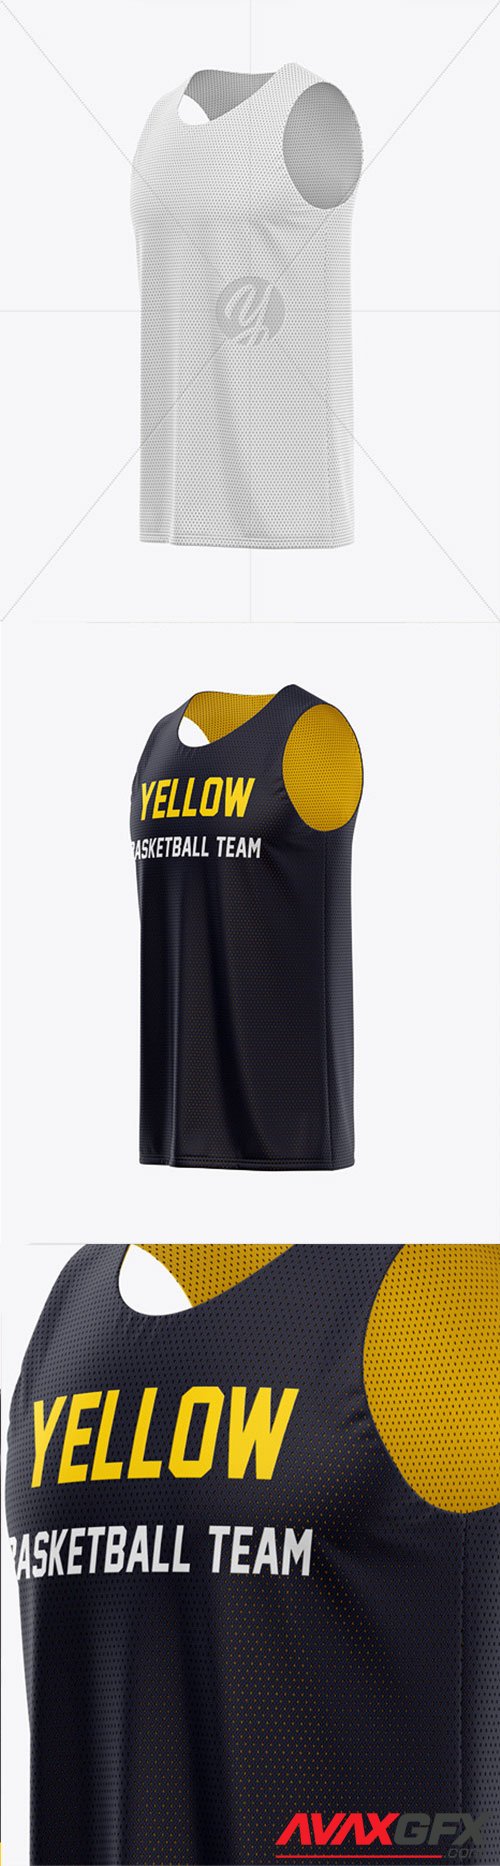 Download Men's Basketball Jersey Mockup - Side View 40533 TIF » AVAXGFX - All Downloads that You Need in ...